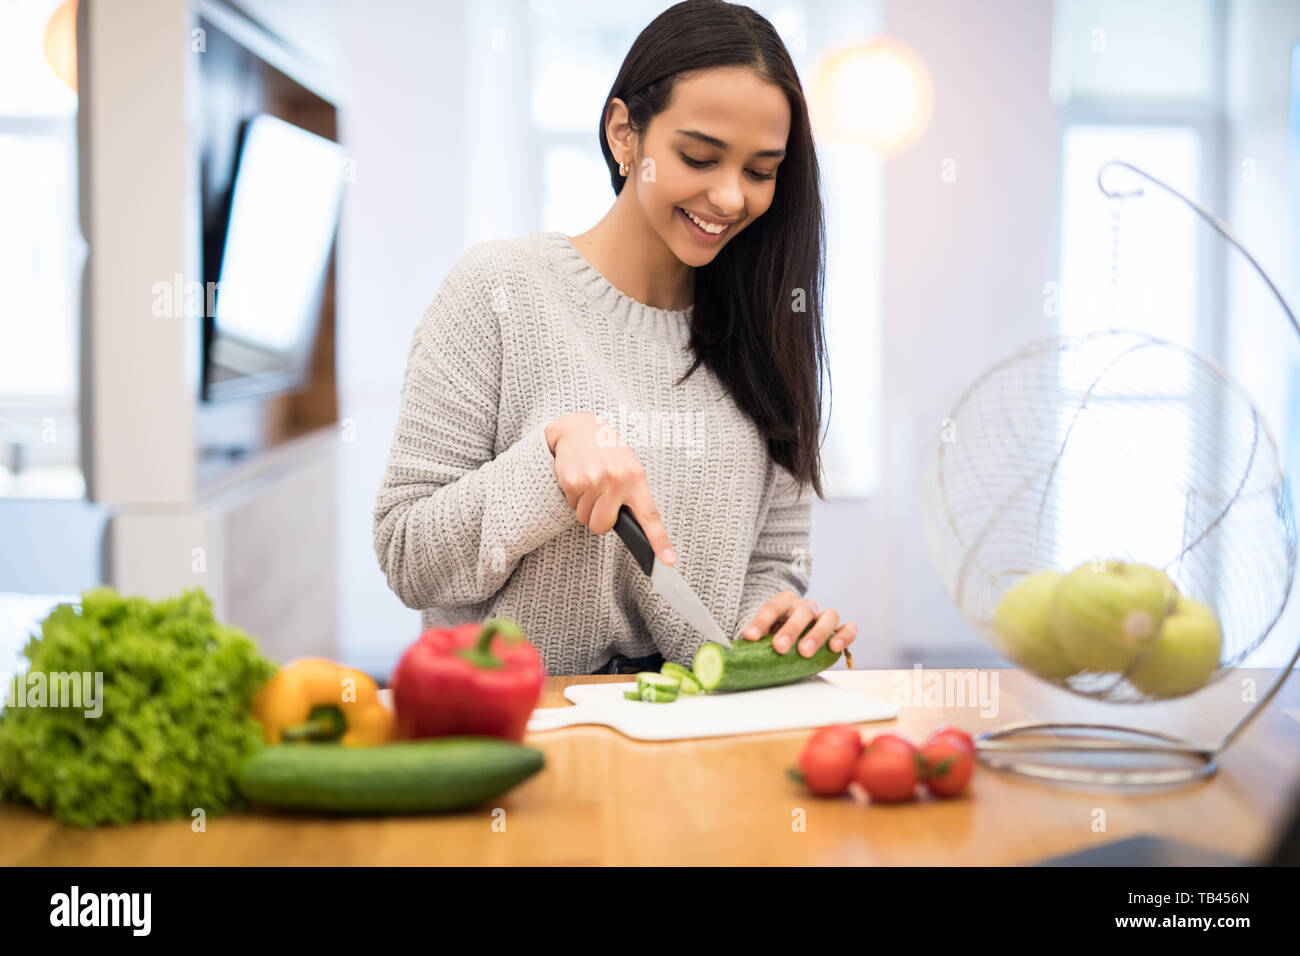 https://c8.alamy.com/comp/TB456N/the-young-woman-cuts-vegetables-in-the-kitchen-with-a-knife-and-laptop-on-the-table-vegetable-salad-diet-dieting-concept-healthy-lifestyle-cookin-TB456N.jpg